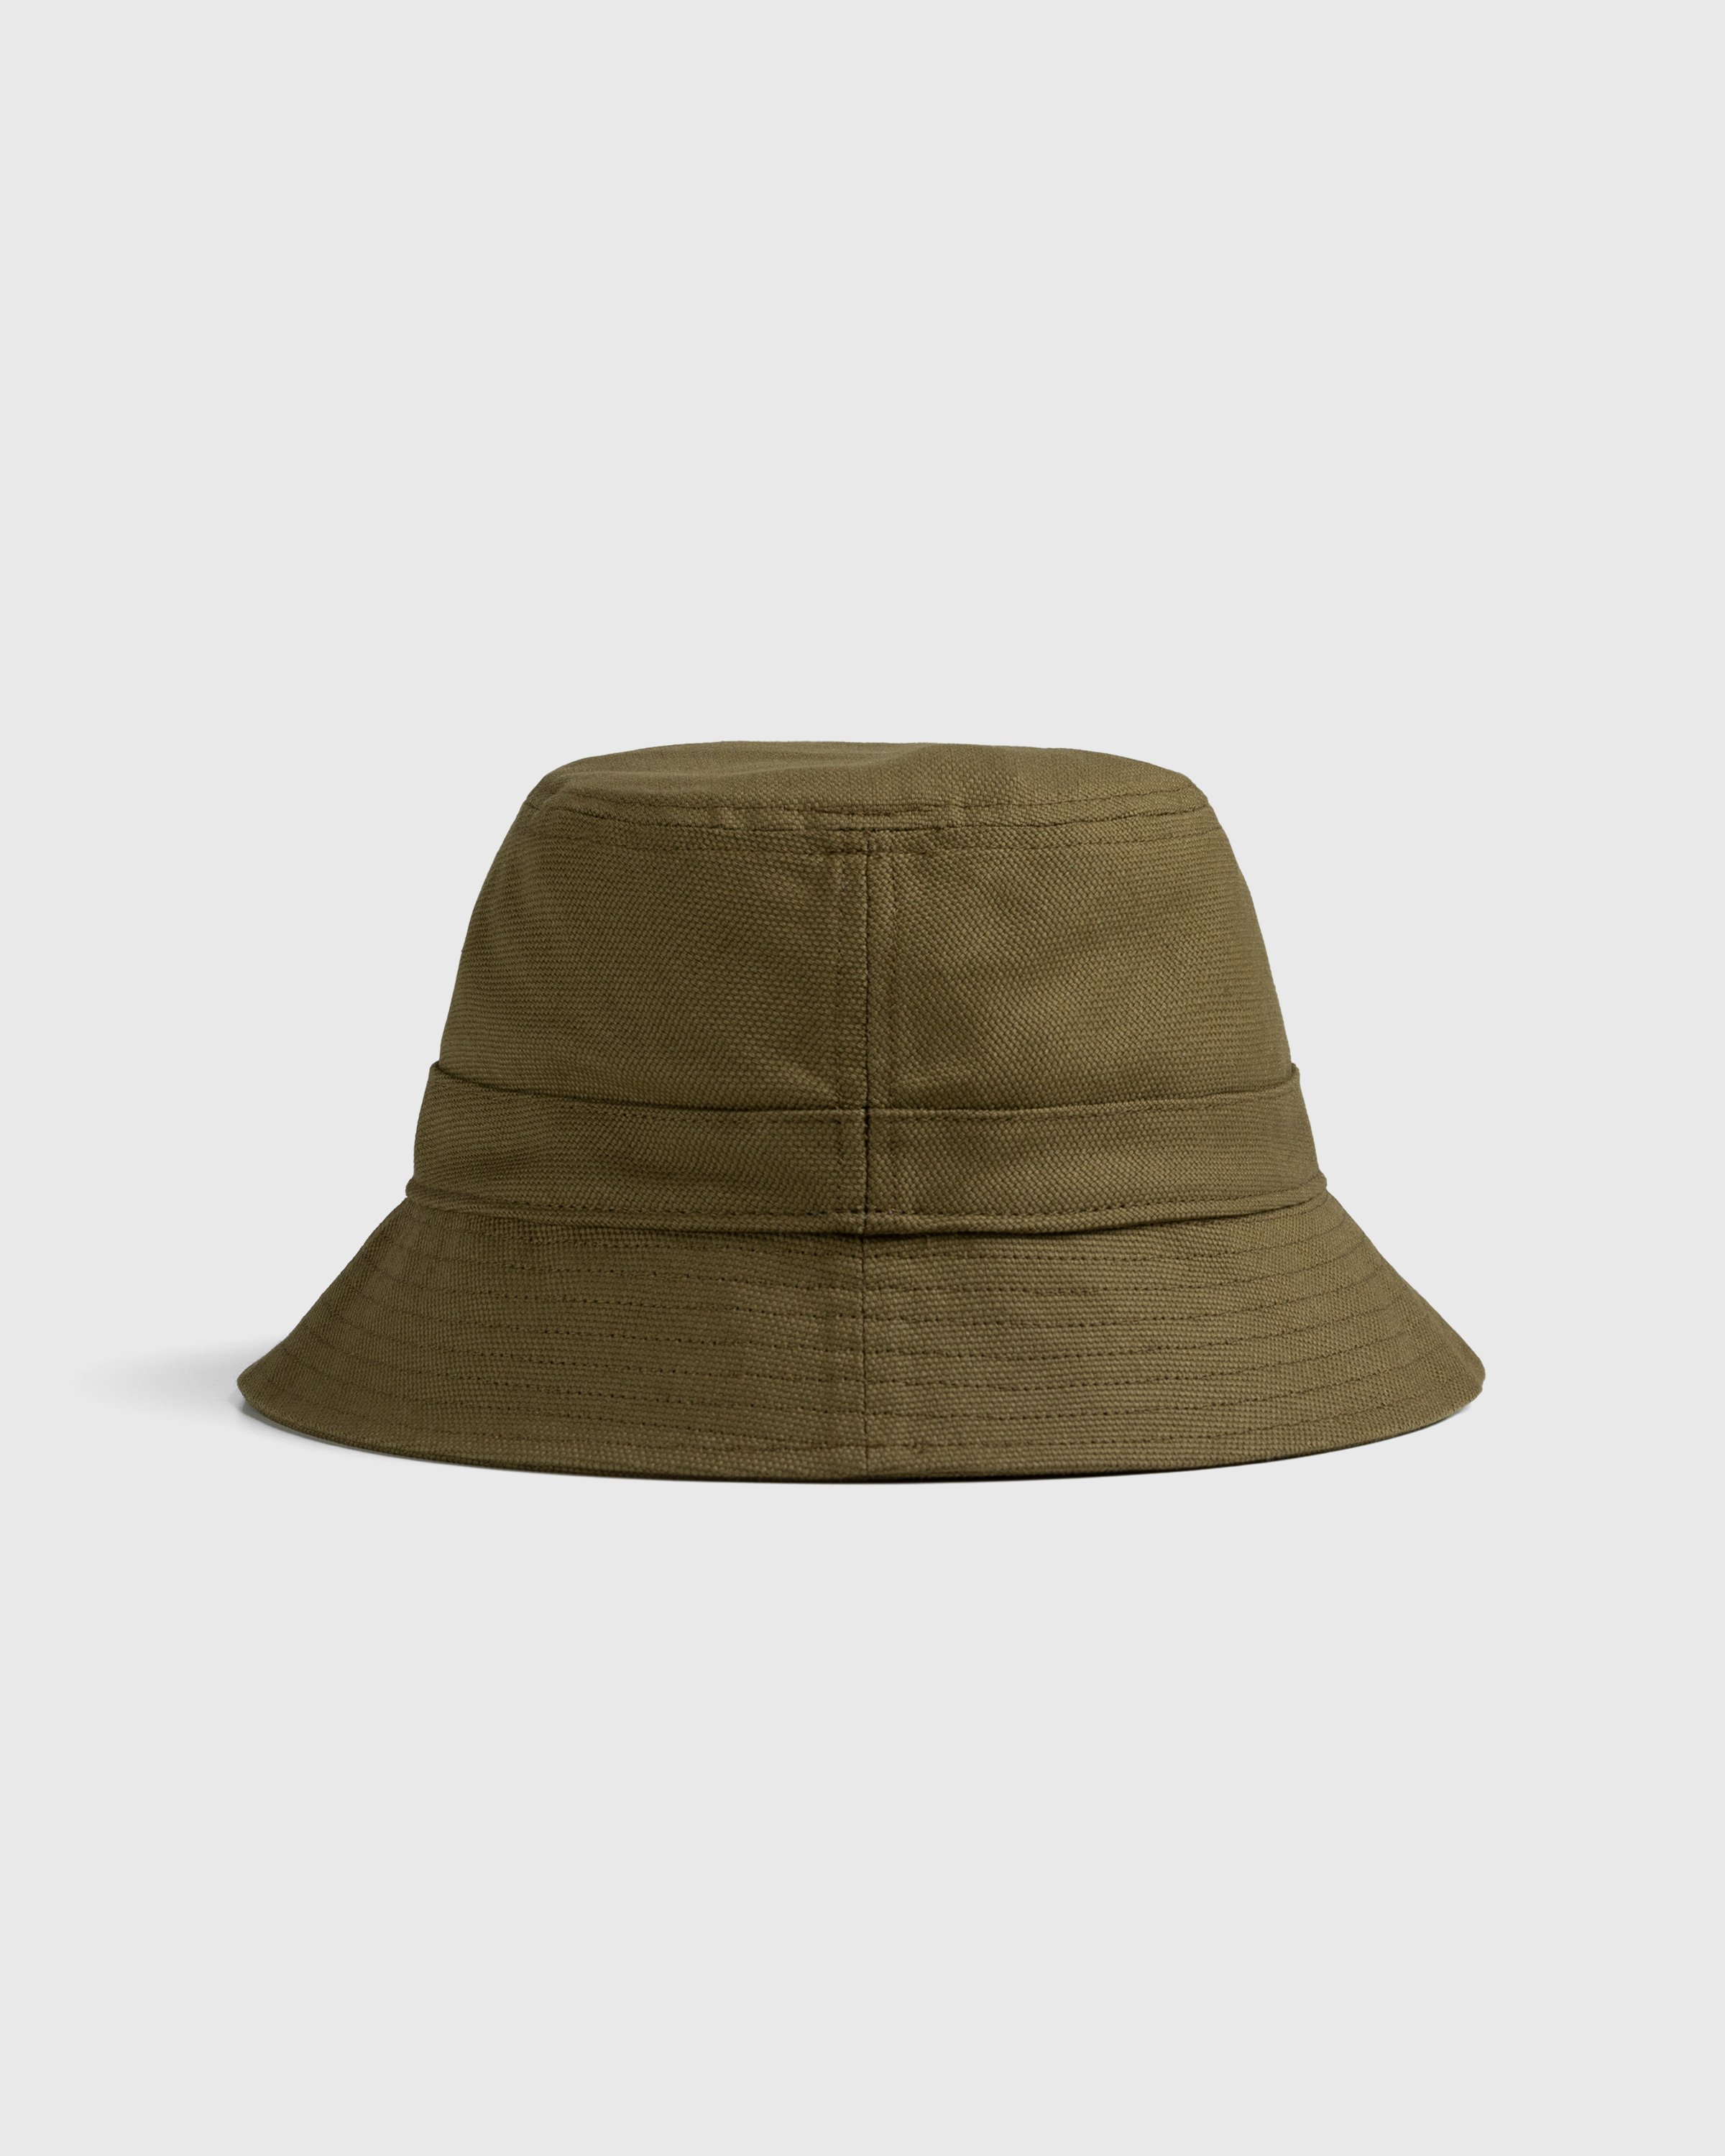 The North Face - Mountain Bucket Hat Olive - Accessories - Green - Image 2